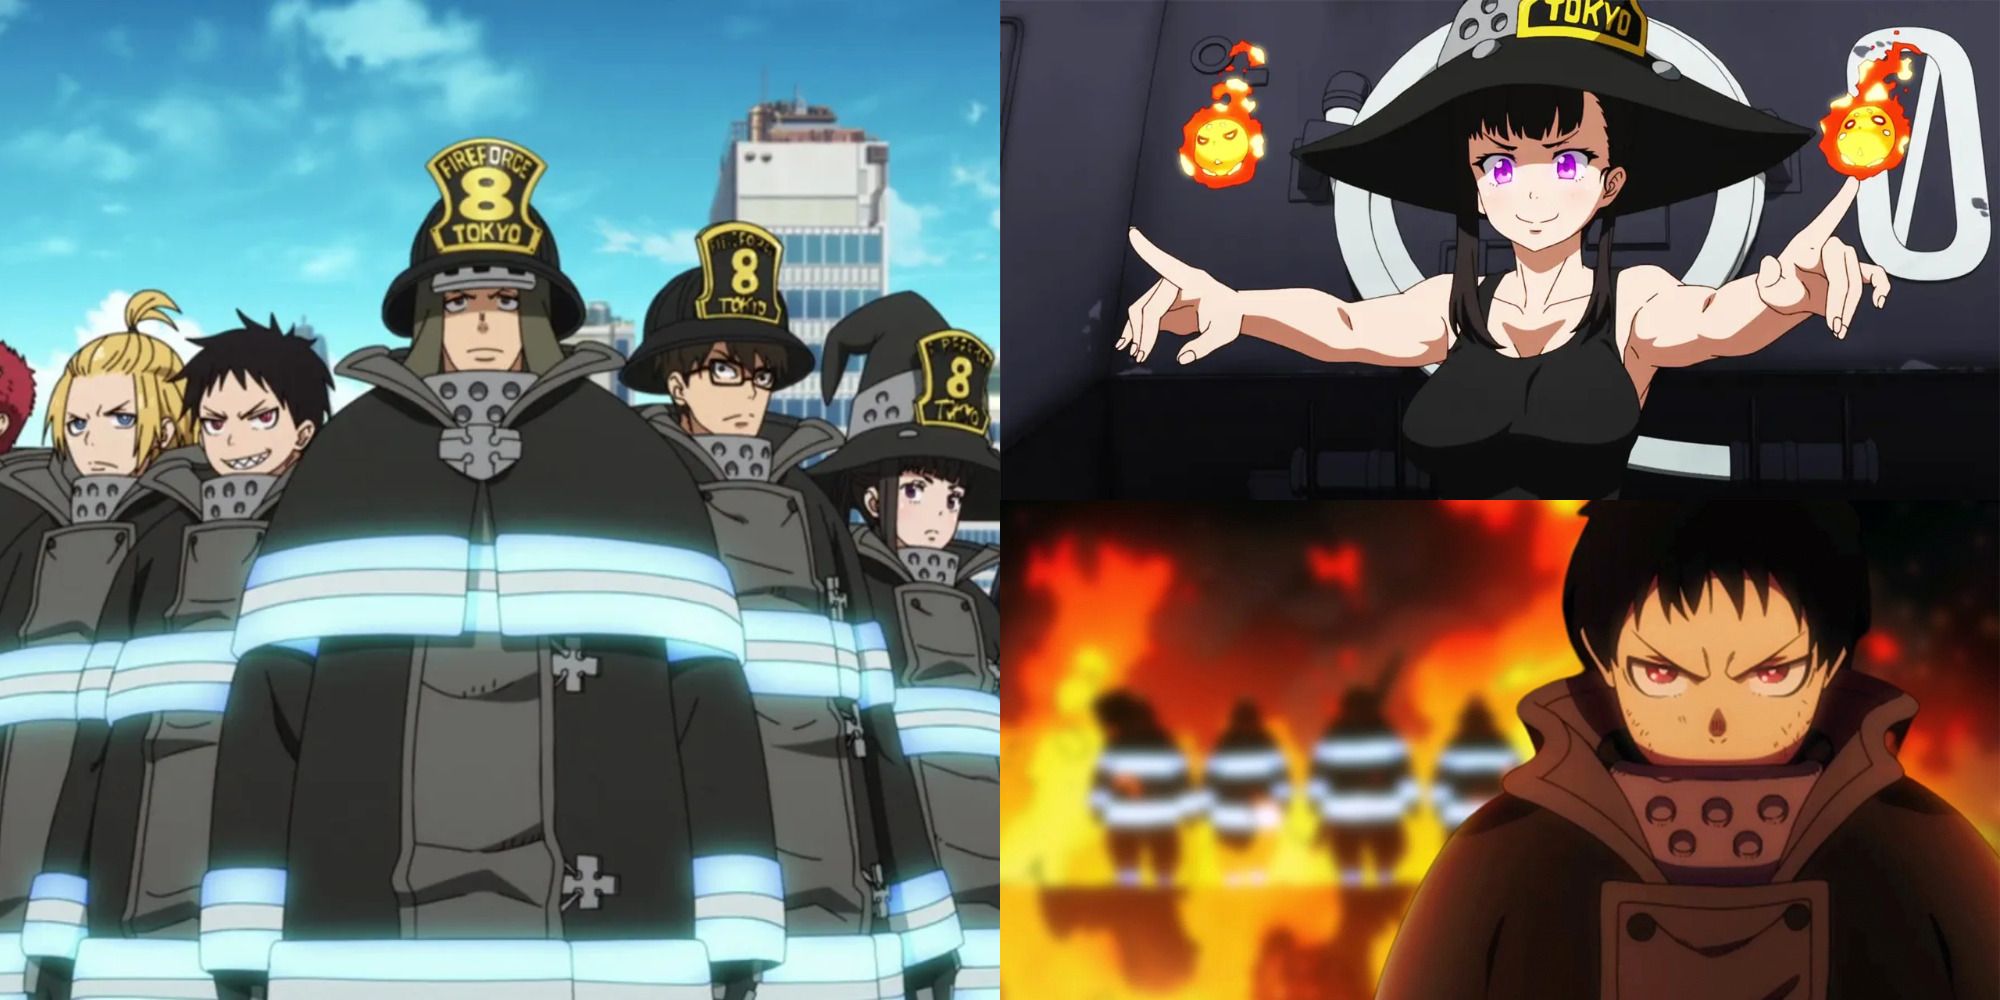 joker is hands down one of the best characters in fire force : r/firebrigade